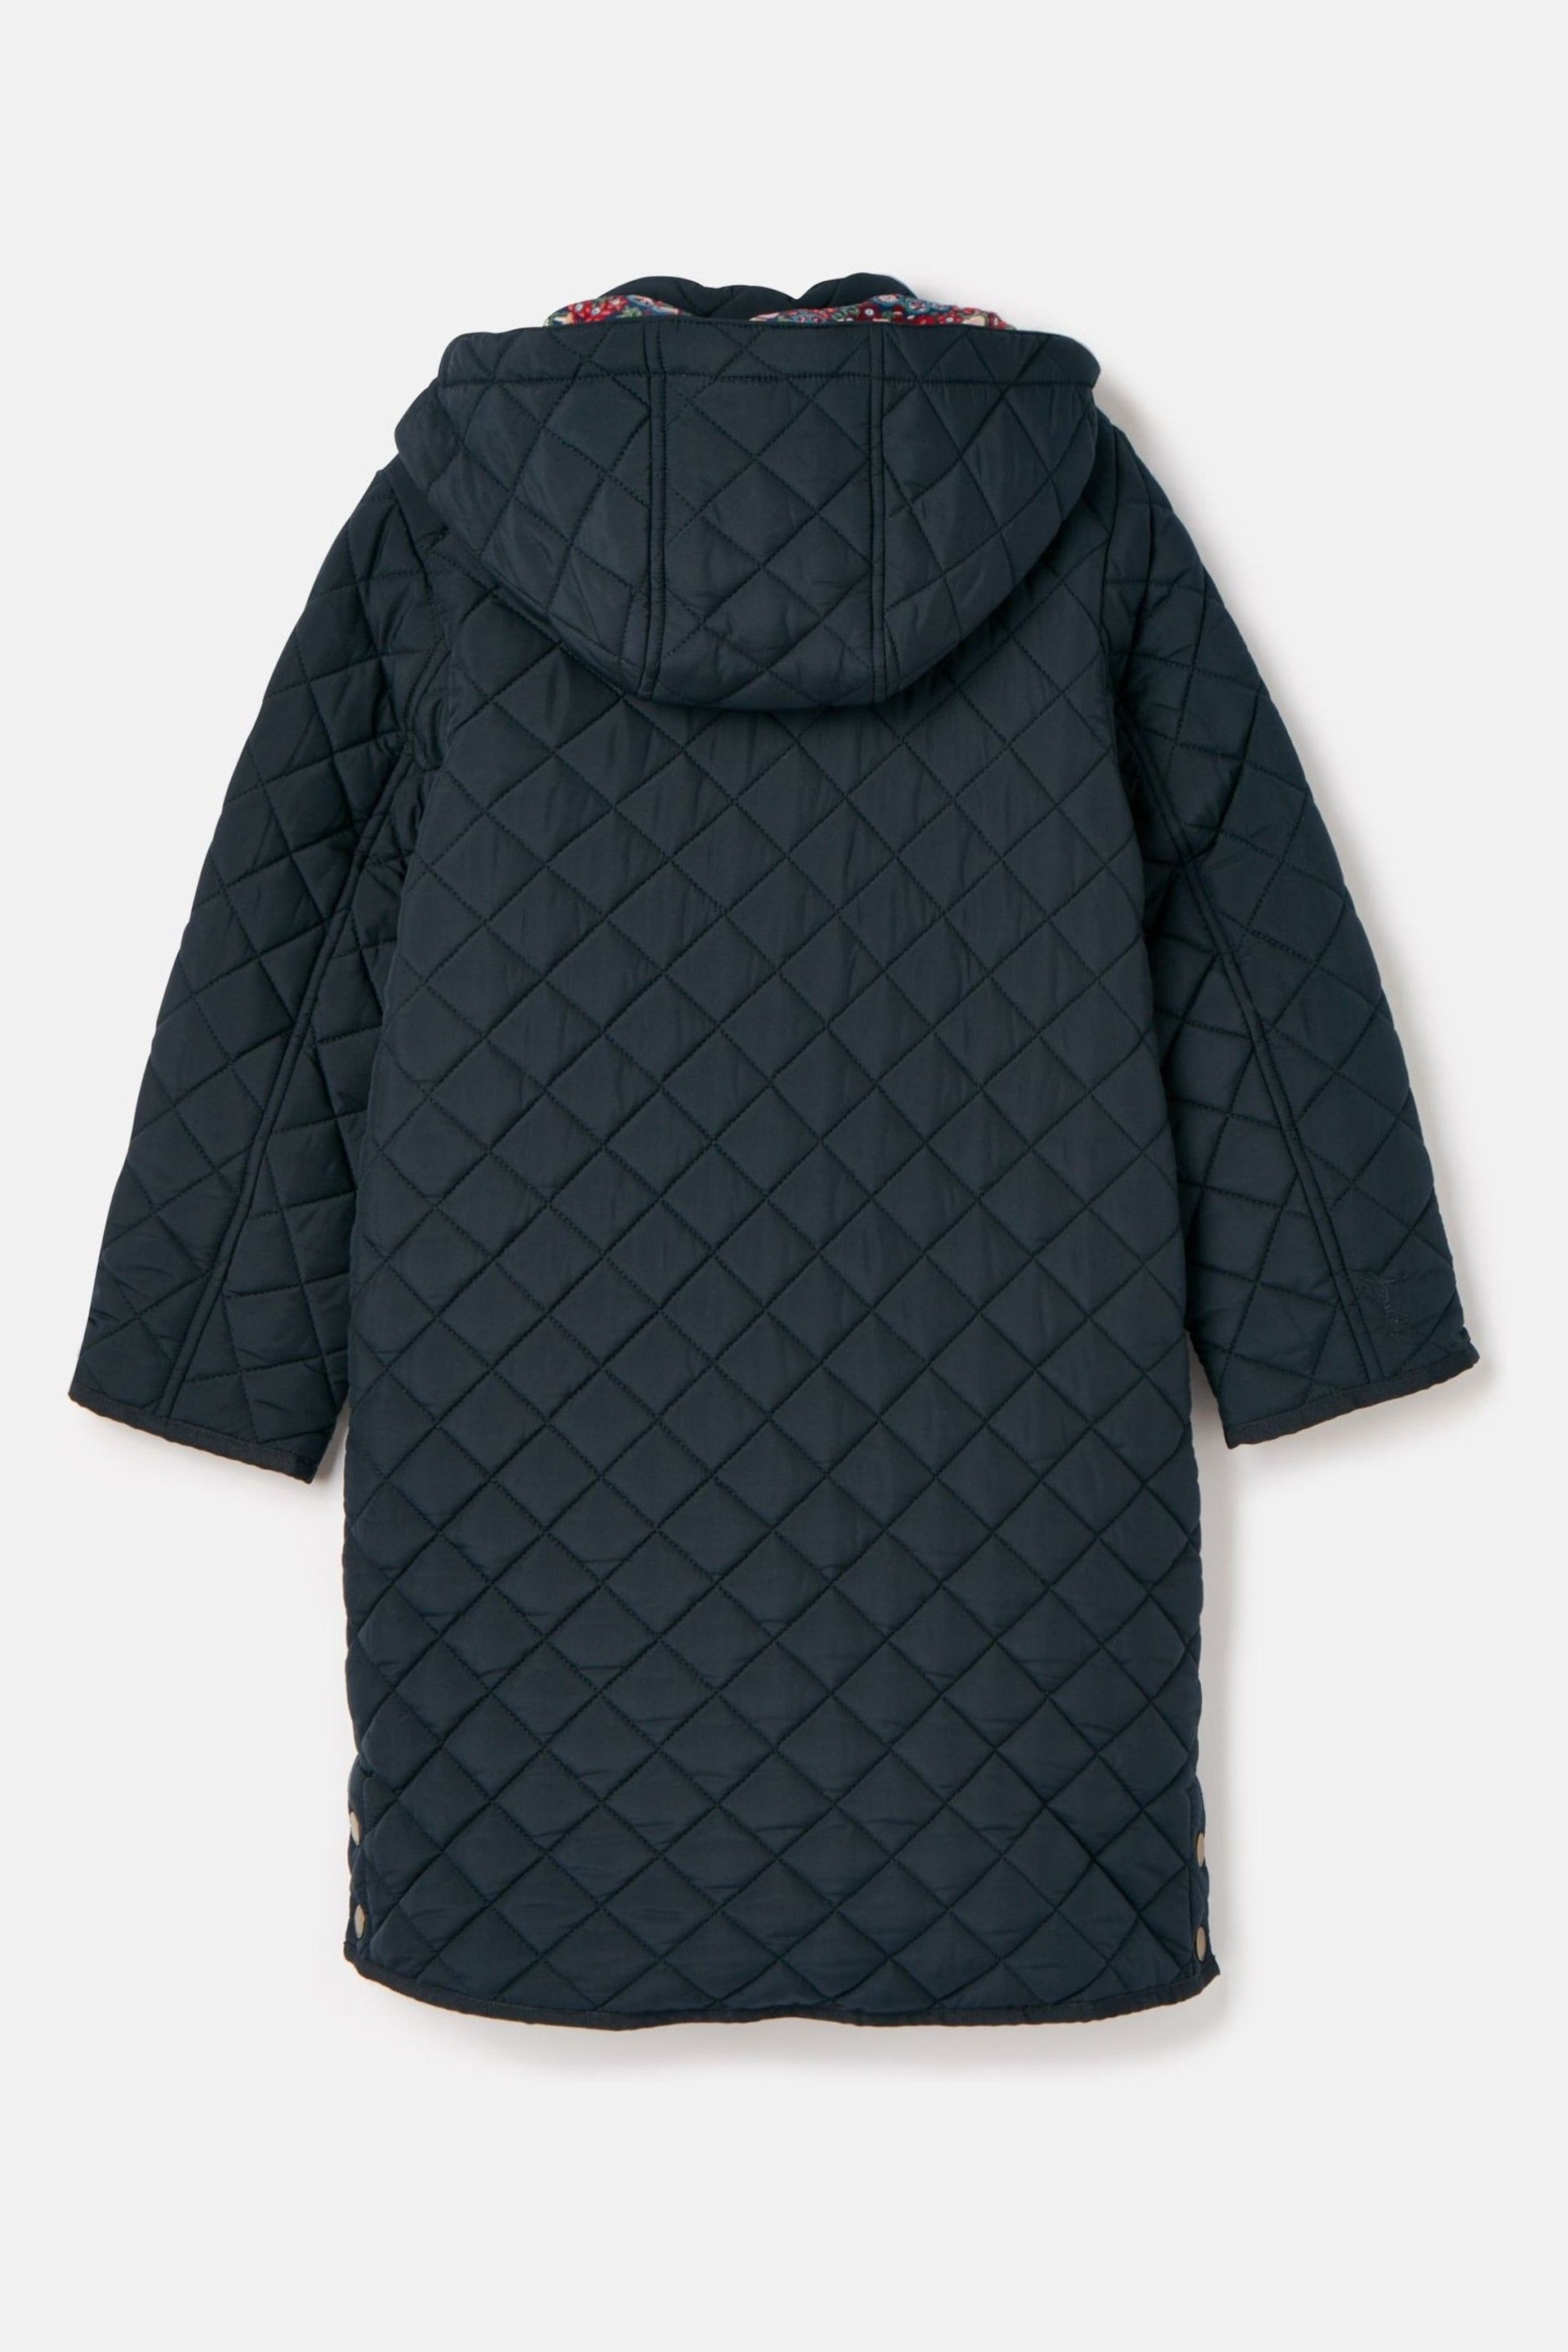 Joules Chatham Navy Showerproof Padded Quilted Coat - Image 3 of 7